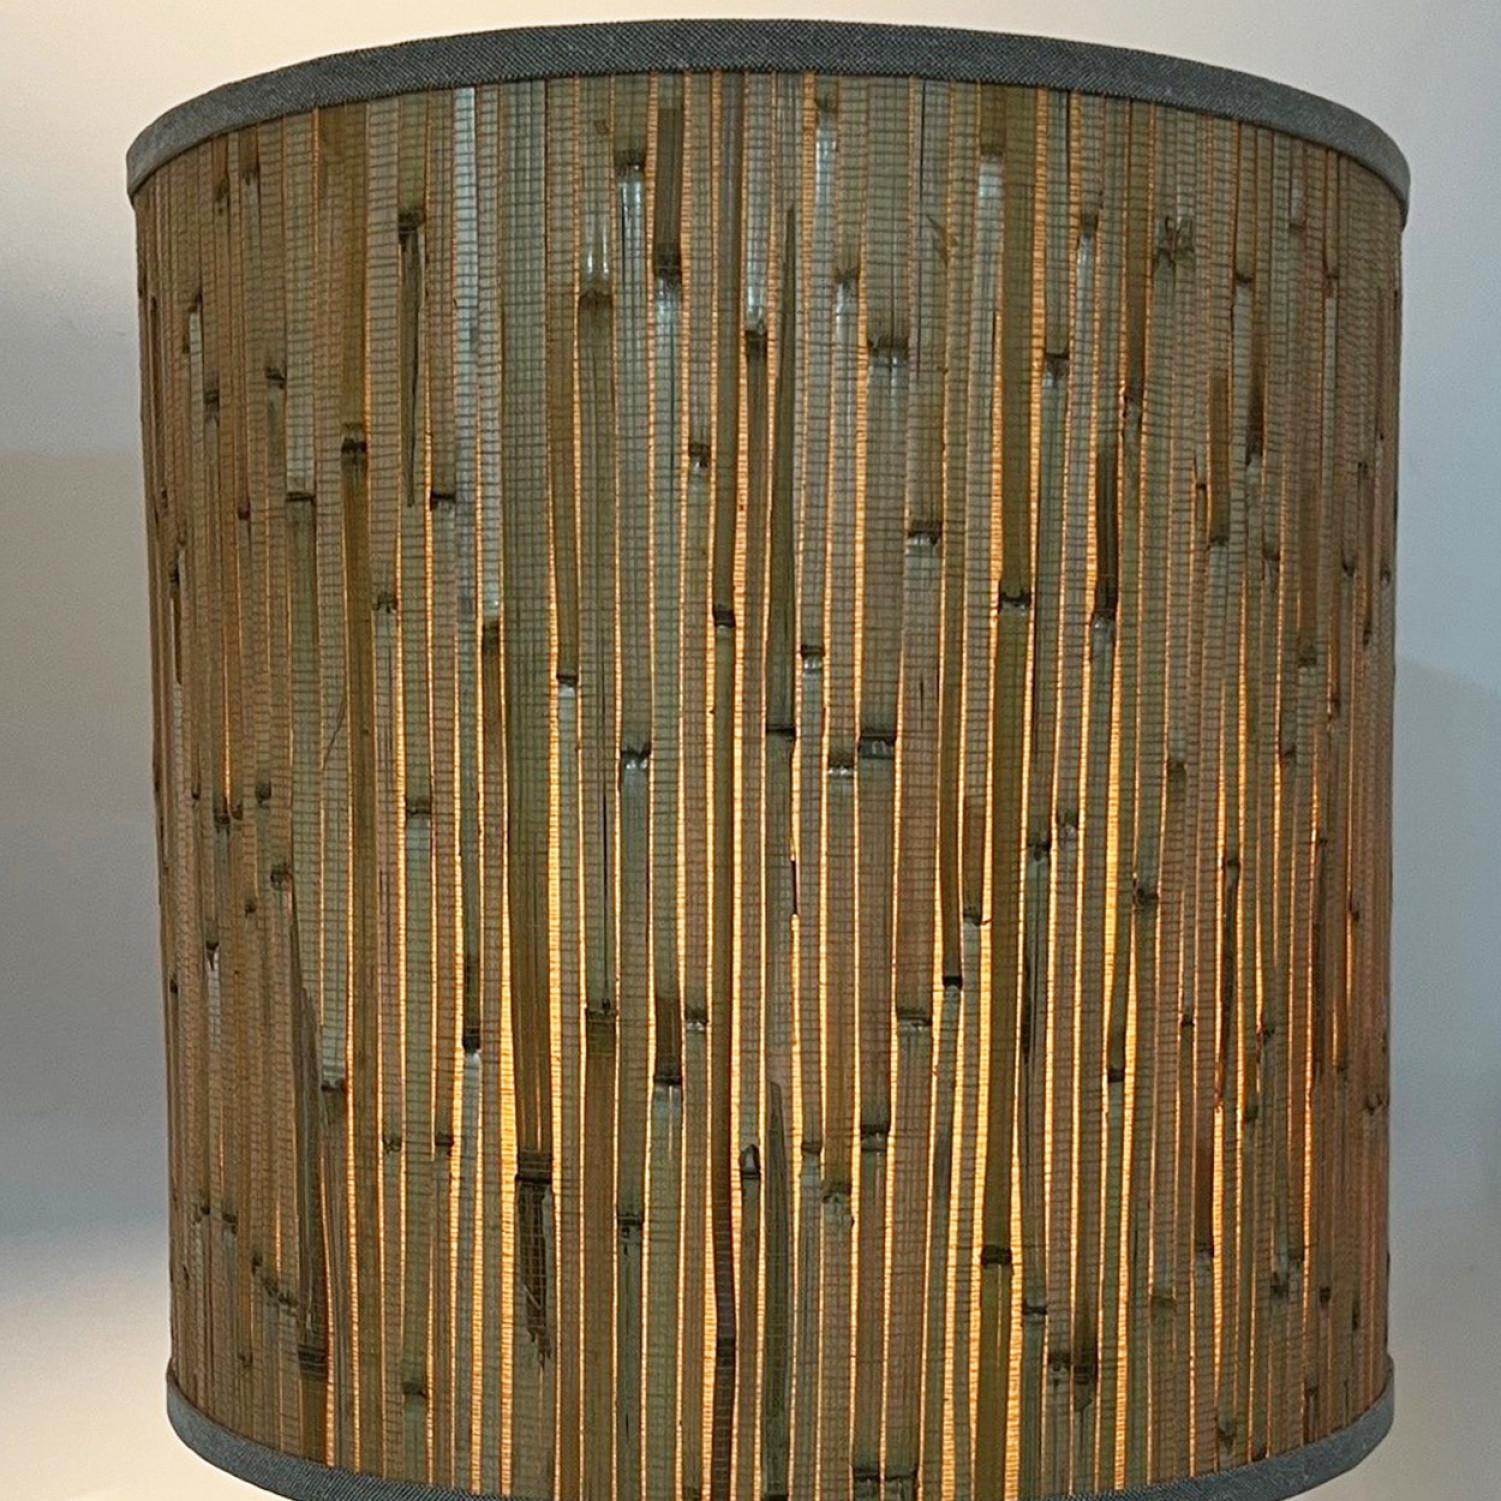 Pair of floor Lamps Gold Brass and Wood by Ingo Maurer, Europe, Germany, 1968 For Sale 2